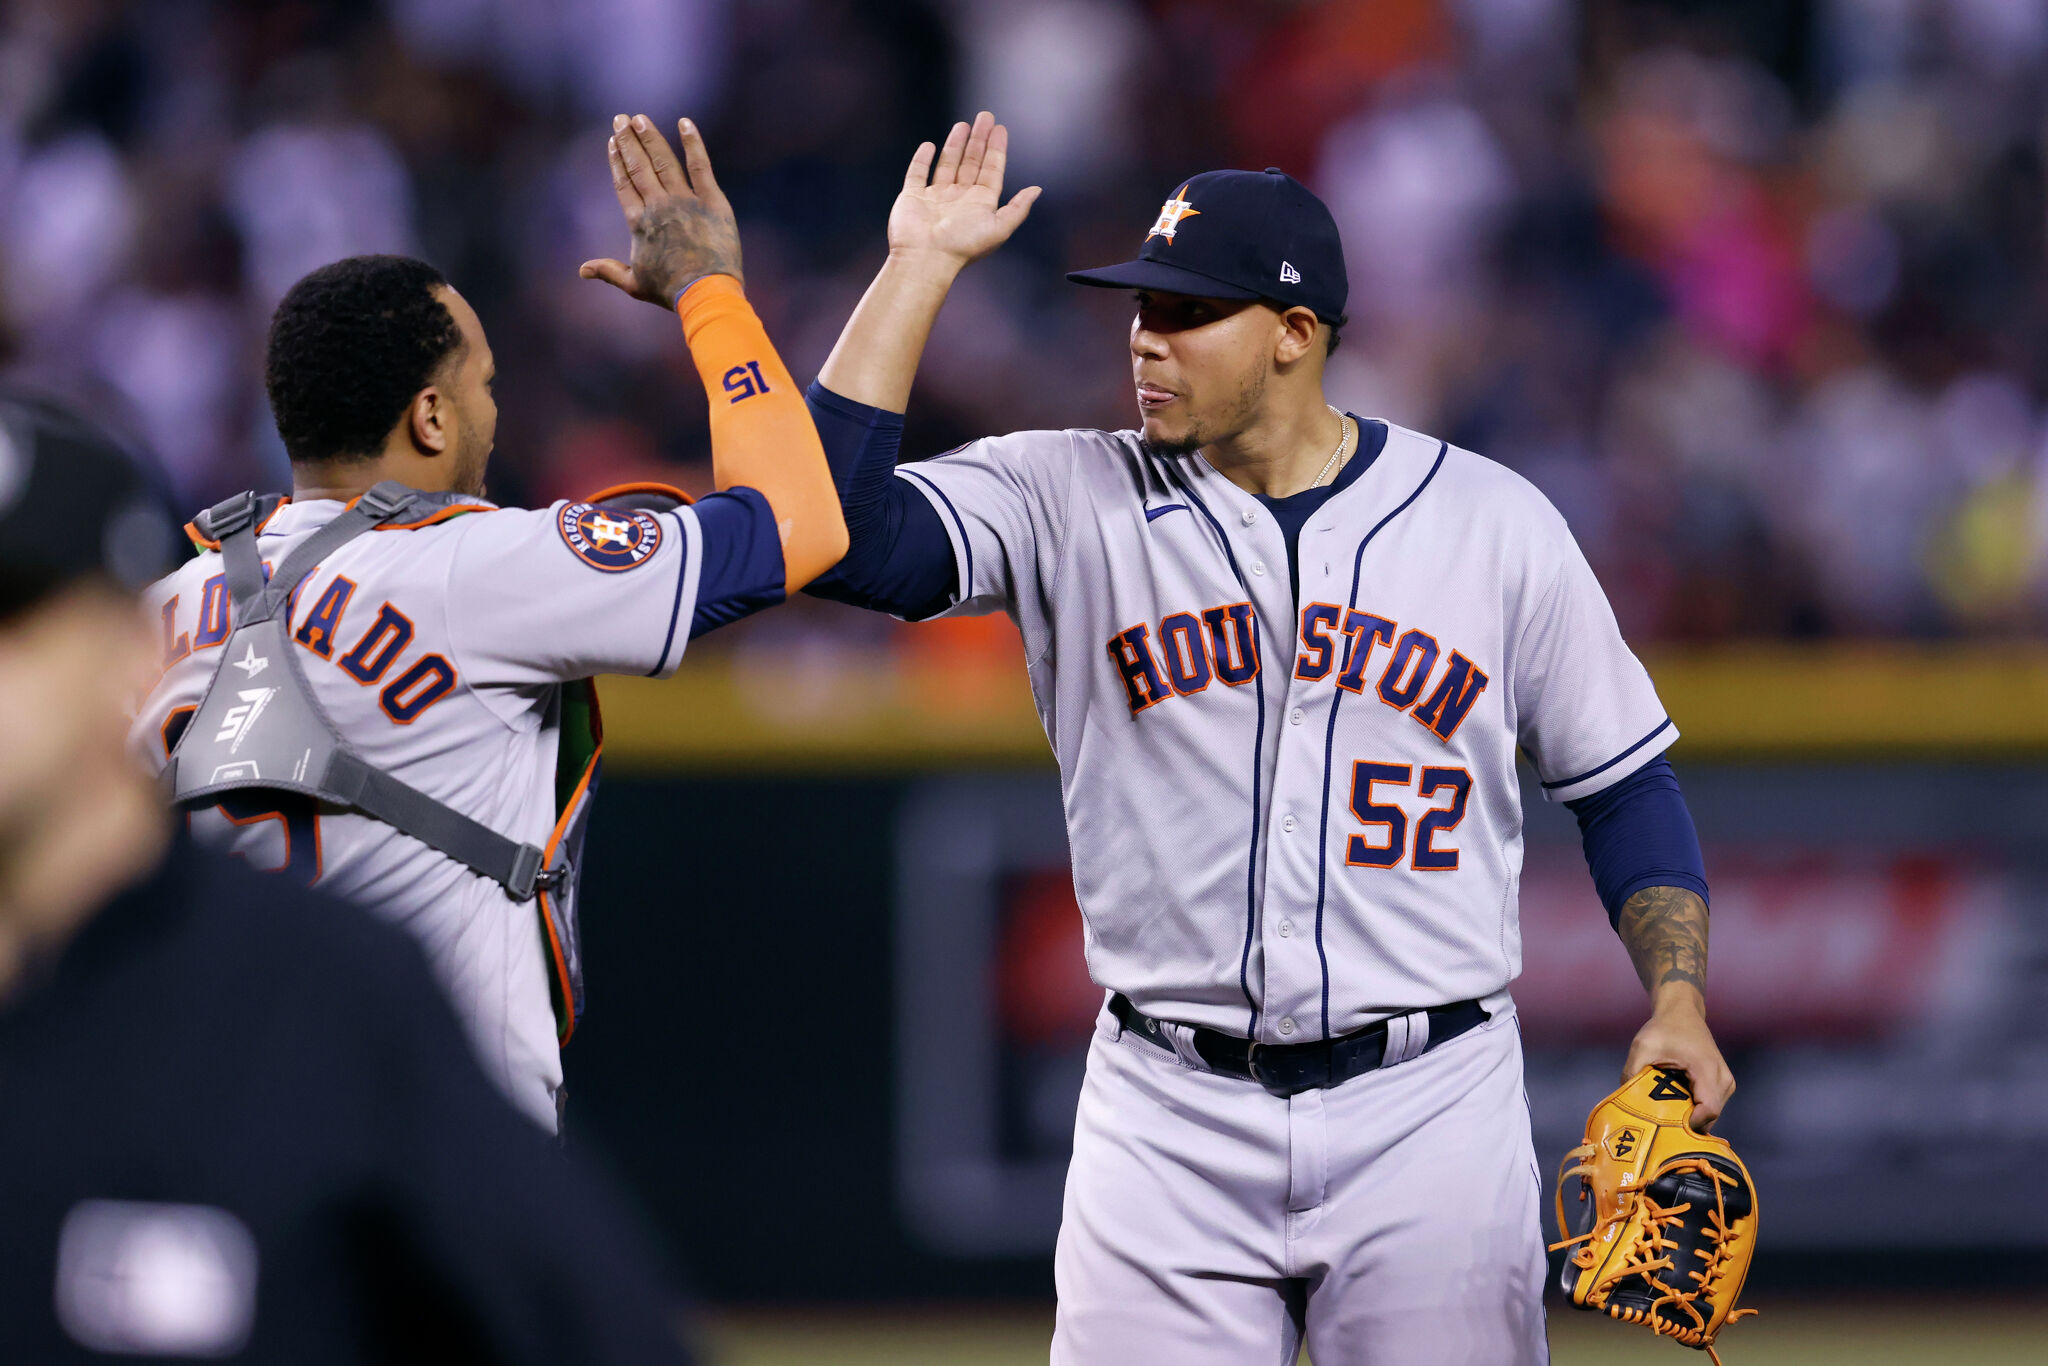 Alvarez has 3 HRs, Astros down A's to clinch playoff berth – KGET 17